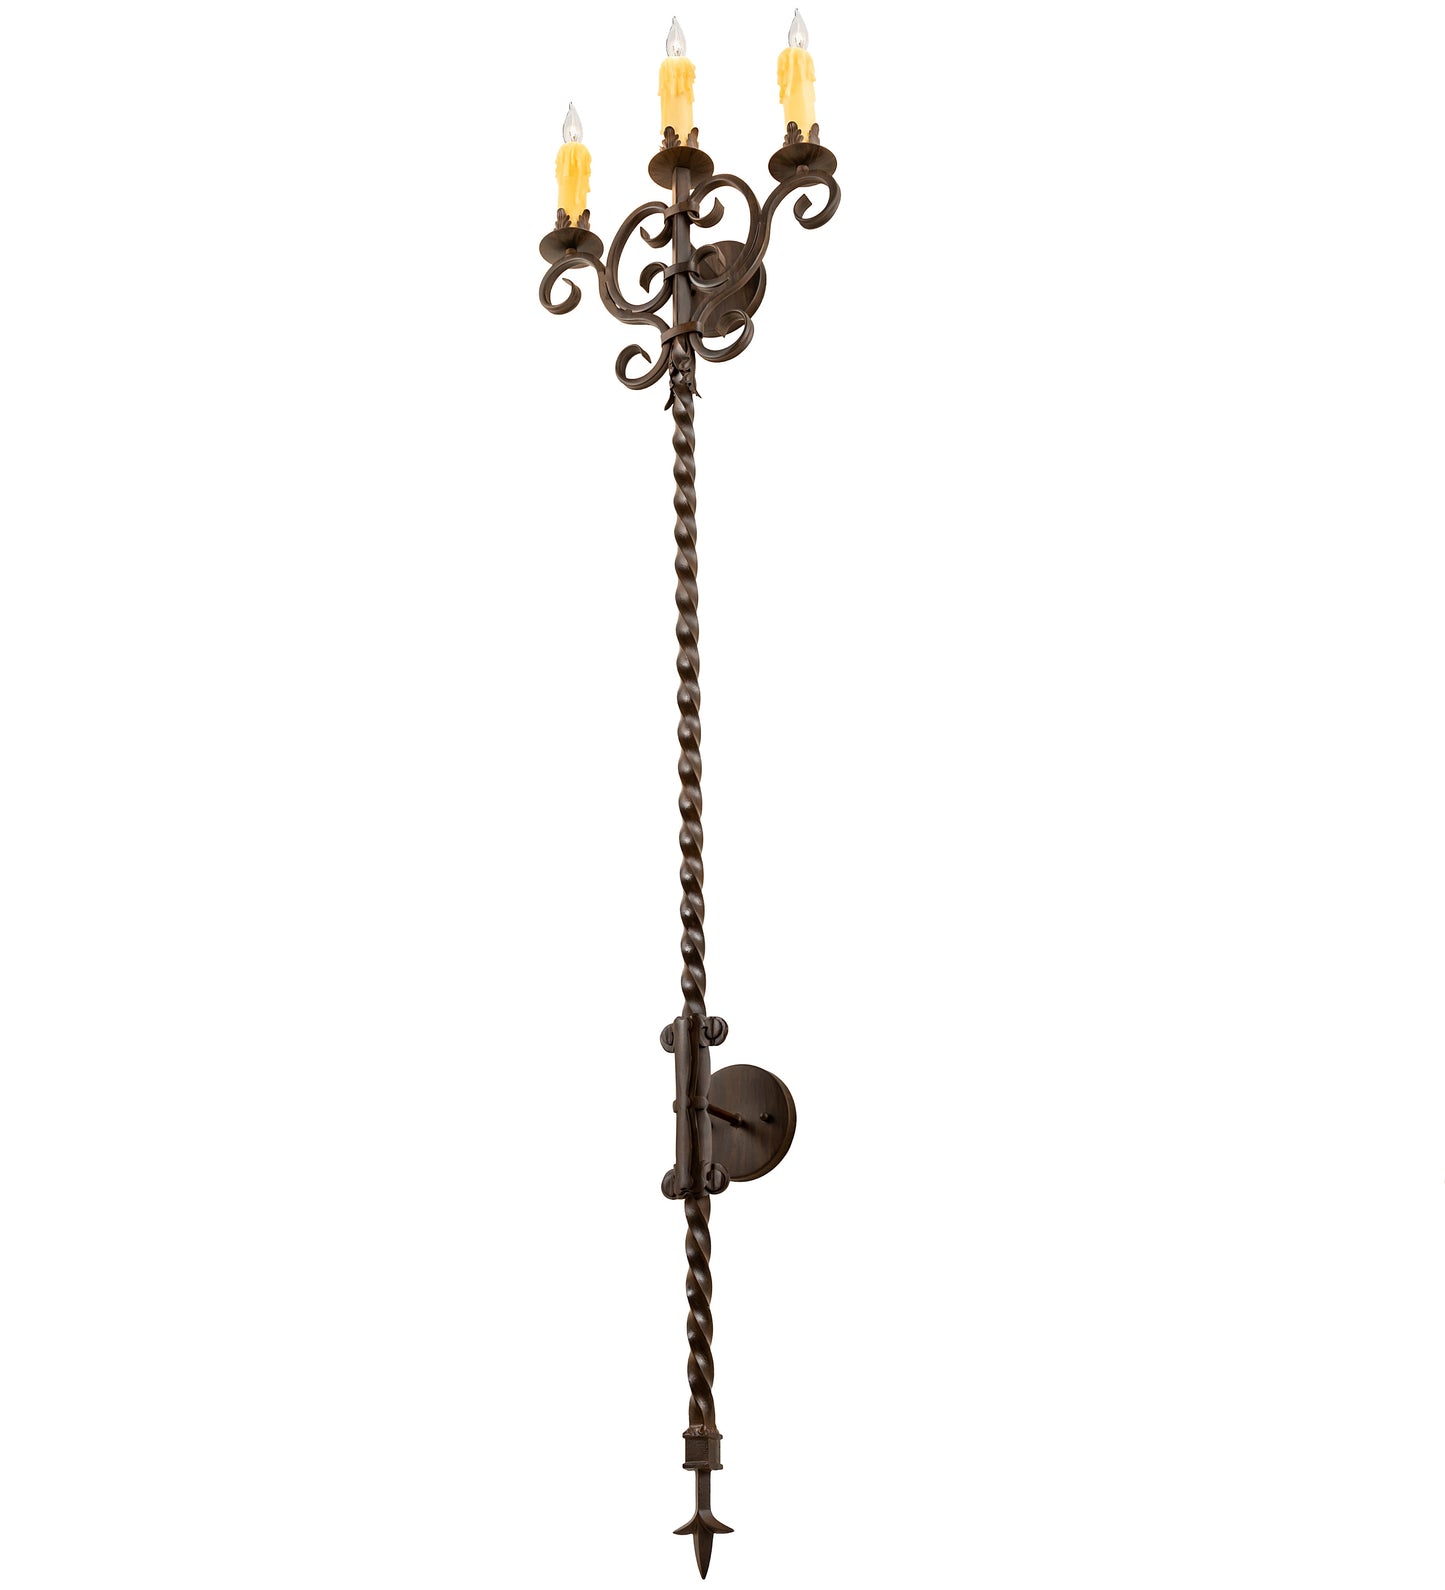 16" Palmira 3-Light Wall Sconce by 2nd Ave Lighting